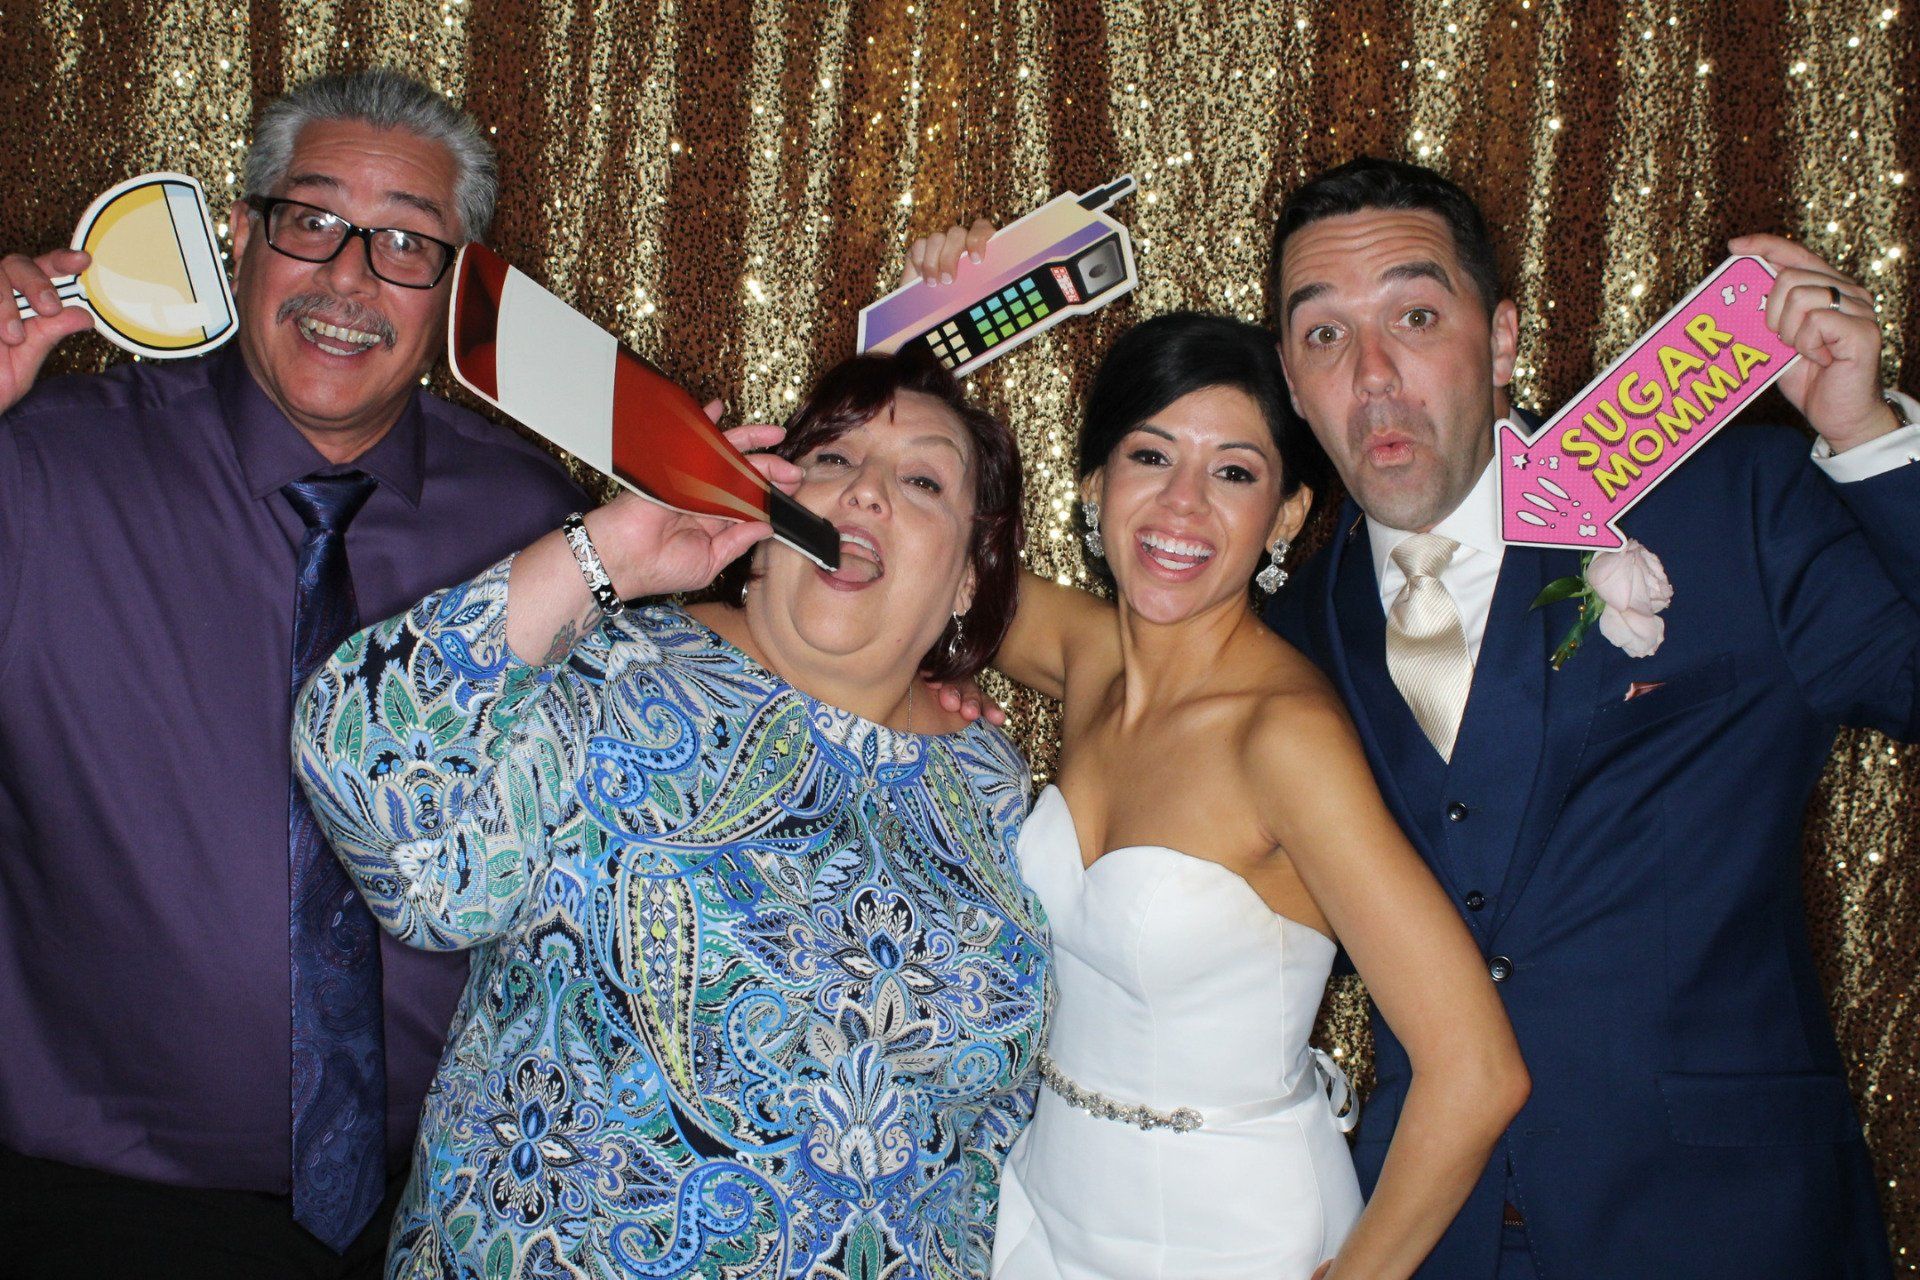 wedding guests having fun in photo booth